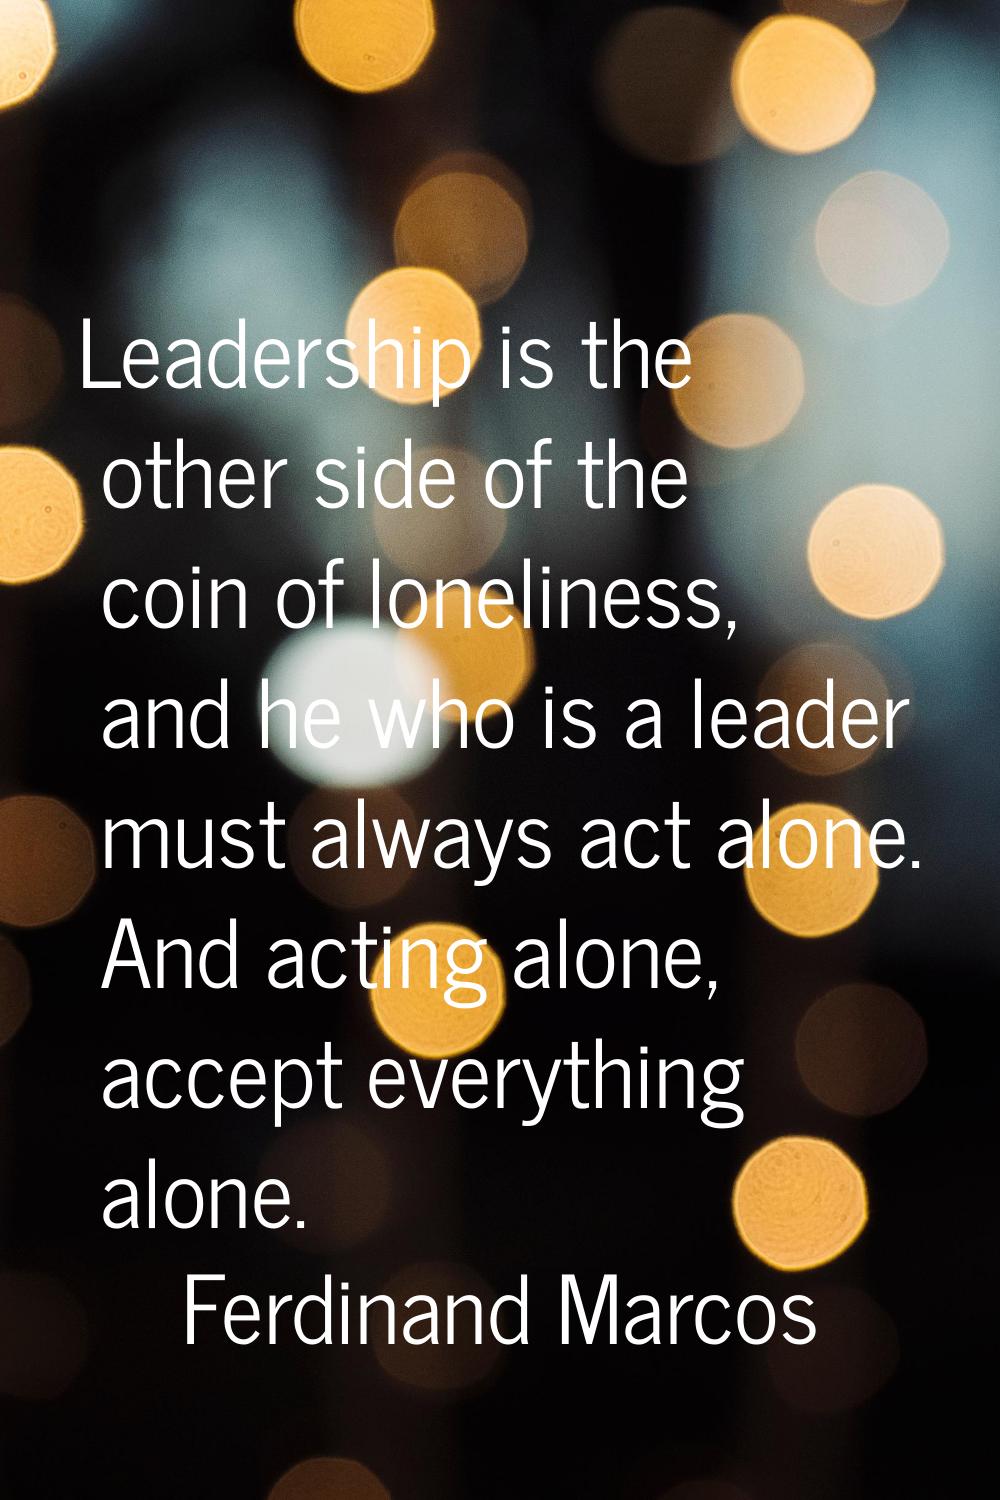 Leadership is the other side of the coin of loneliness, and he who is a leader must always act alon